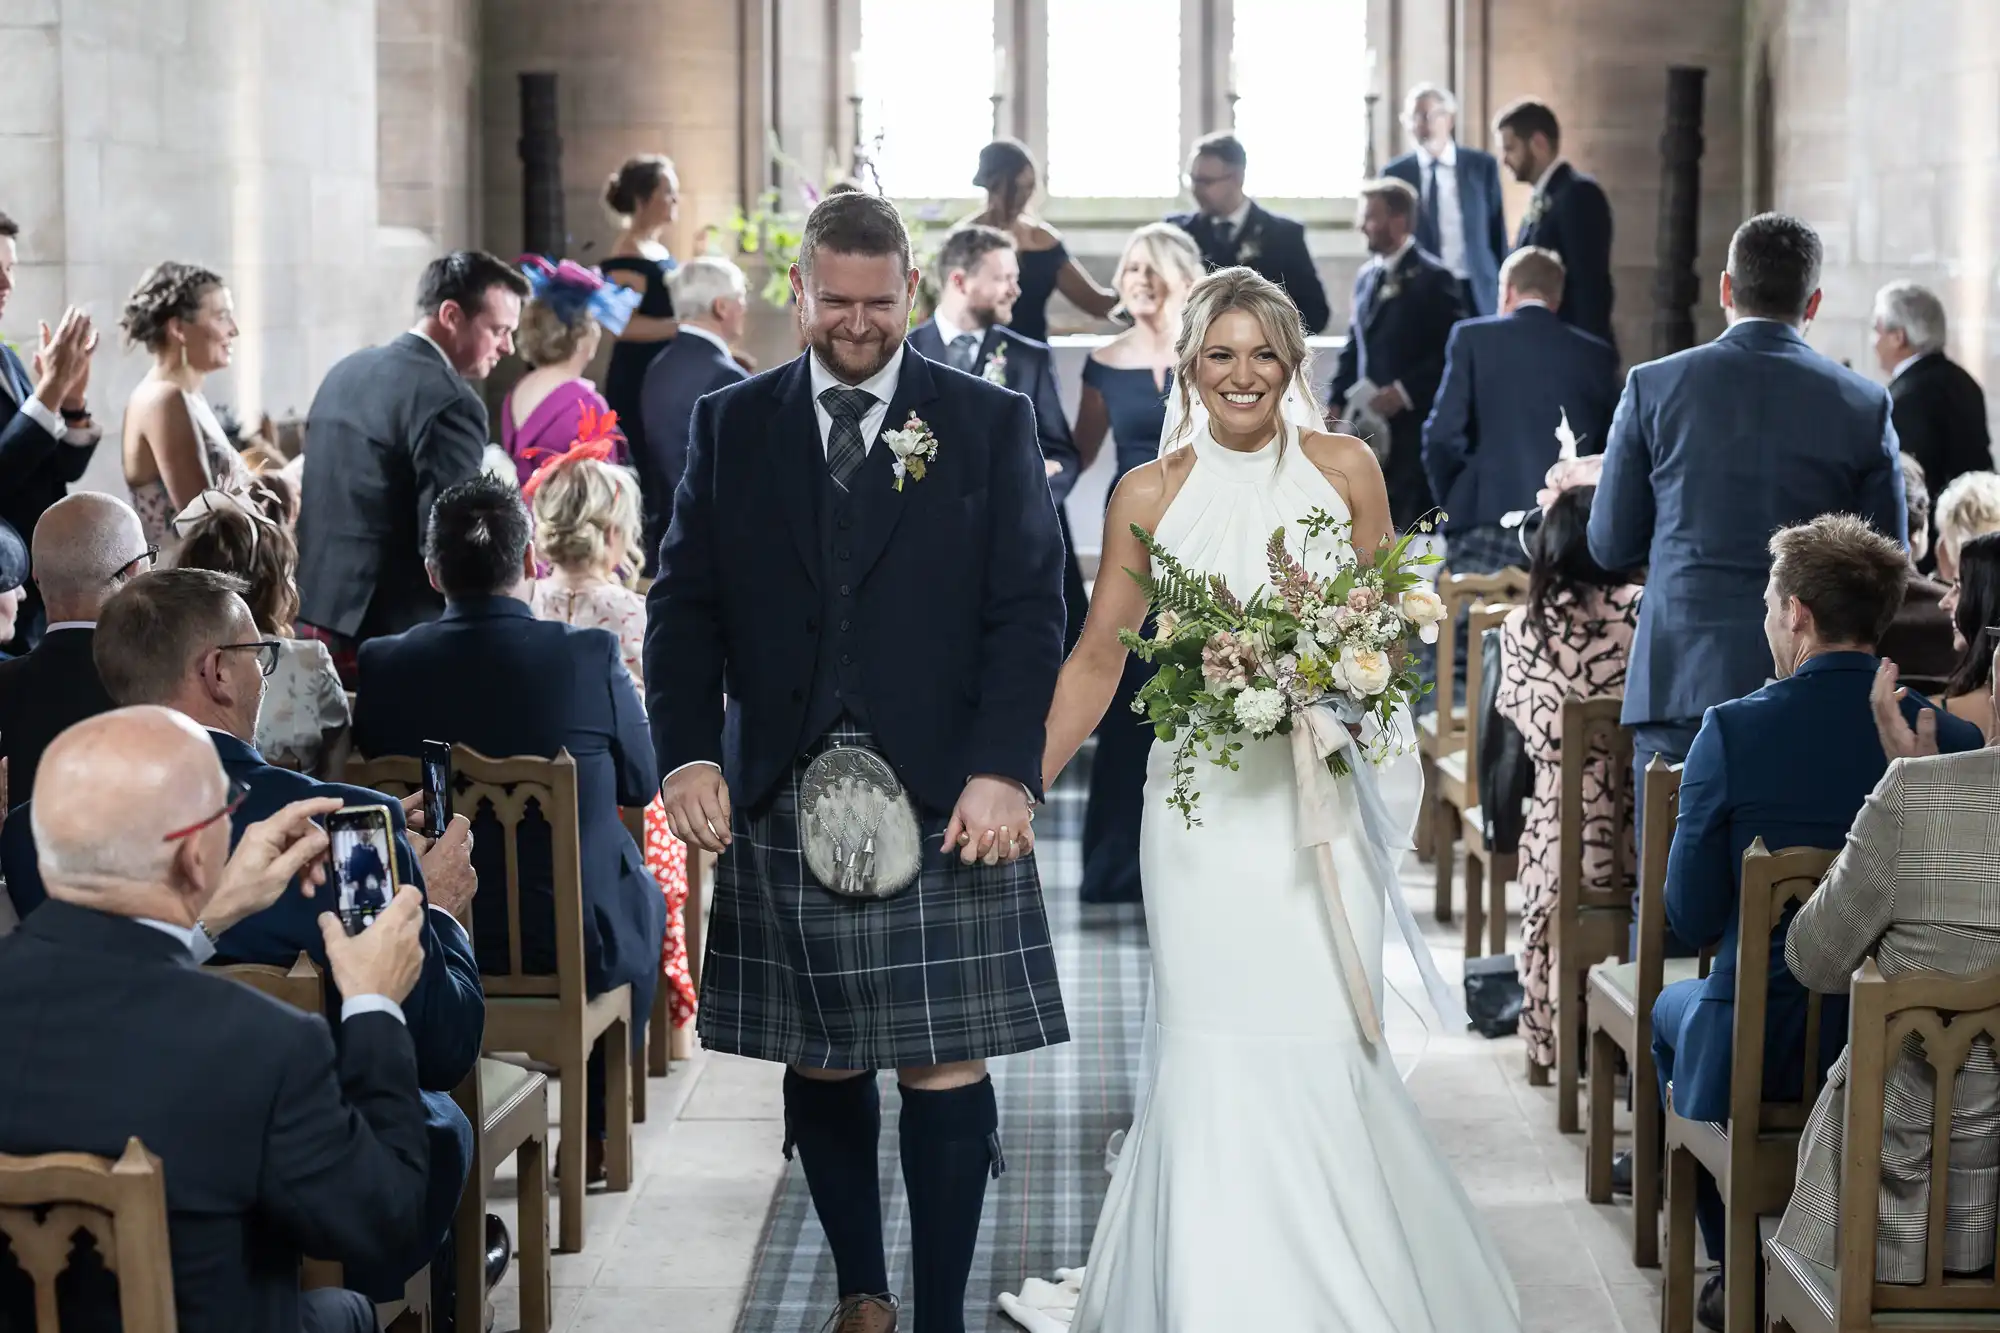 A bride and groom walk down the aisle, smiling, as guests applaud; the groom wears a kilt and the bride carries a bouquet.